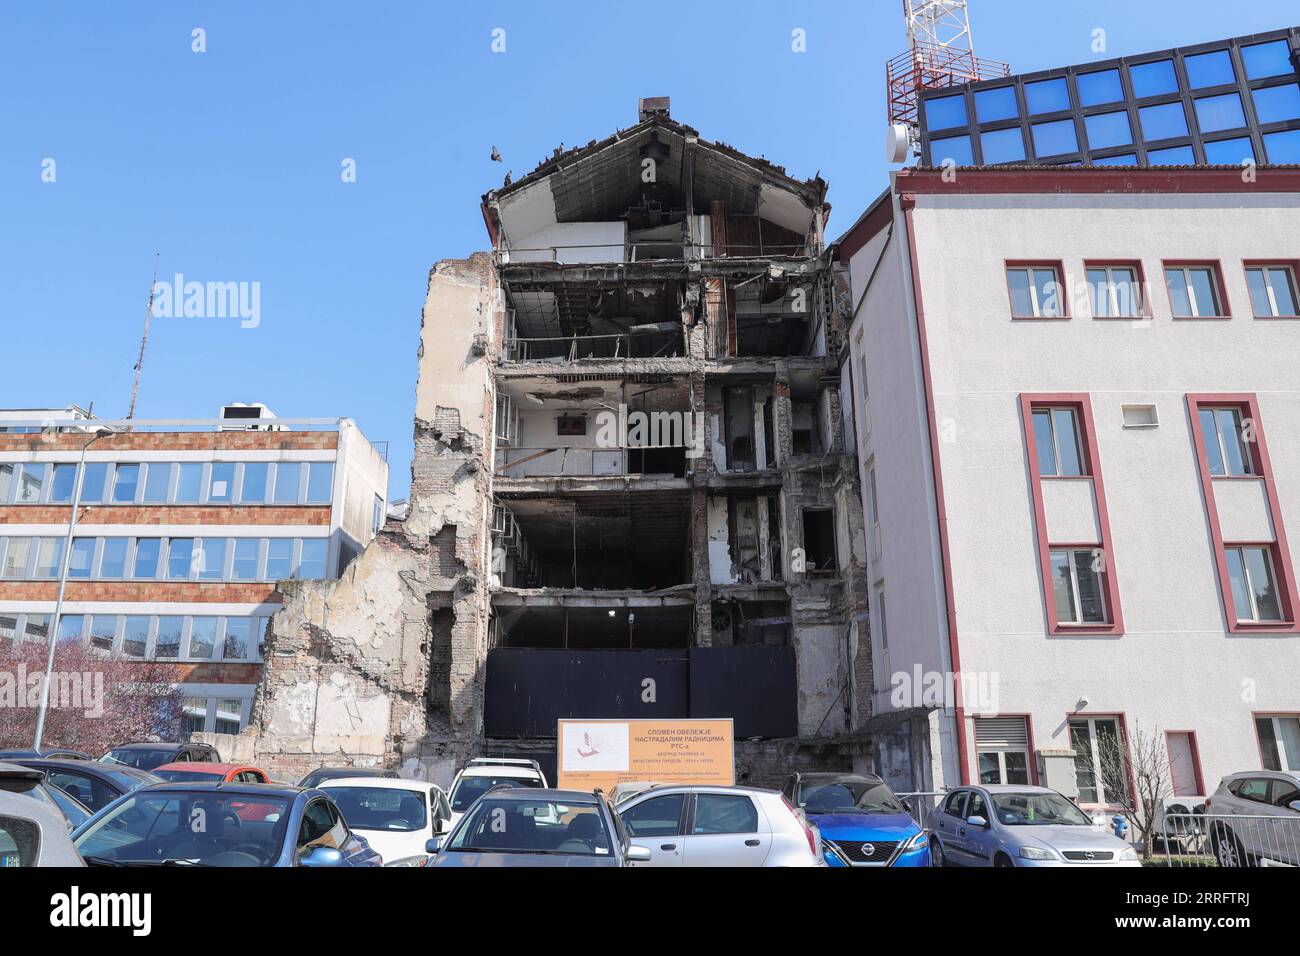 220426 -- BEIJING, April 26, 2022 -- The bombed Radio Television Serbia RTS building is seen in Belgrade, Serbia, March 21, 2022. In Belgrade, there are many scars left by the NATO bombings.  Xinhua Headlines: Uncovering untold secrets of NATO -- a monstrous remnant from Cold War days ZhengxHuansong PUBLICATIONxNOTxINxCHN Stock Photo